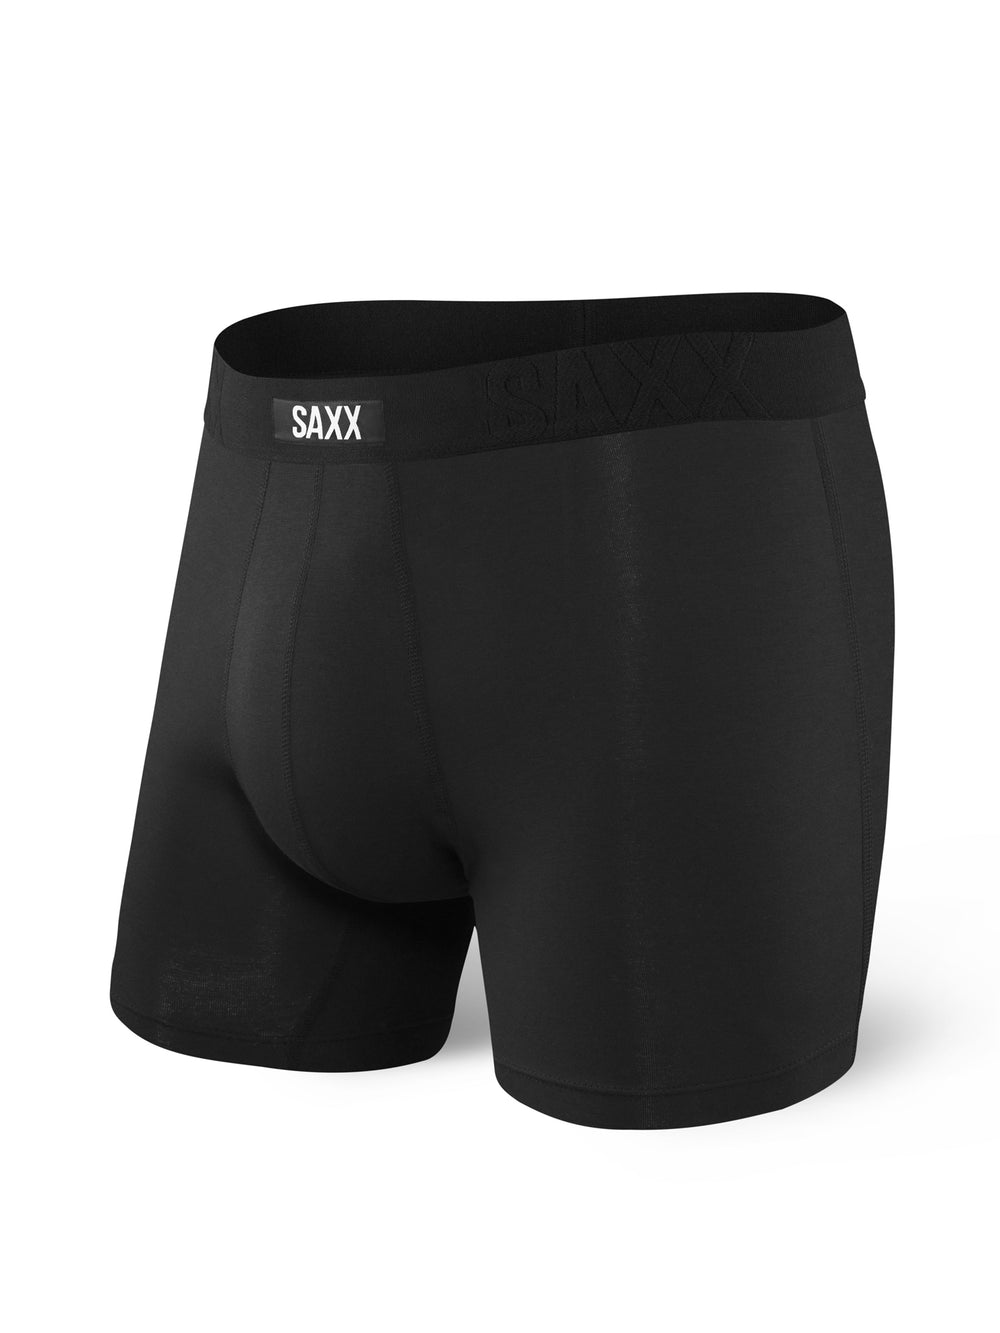 Men's Underwear, Boxer Shorts & Trunks  Afterpay Day coming soon to Cotton  On!